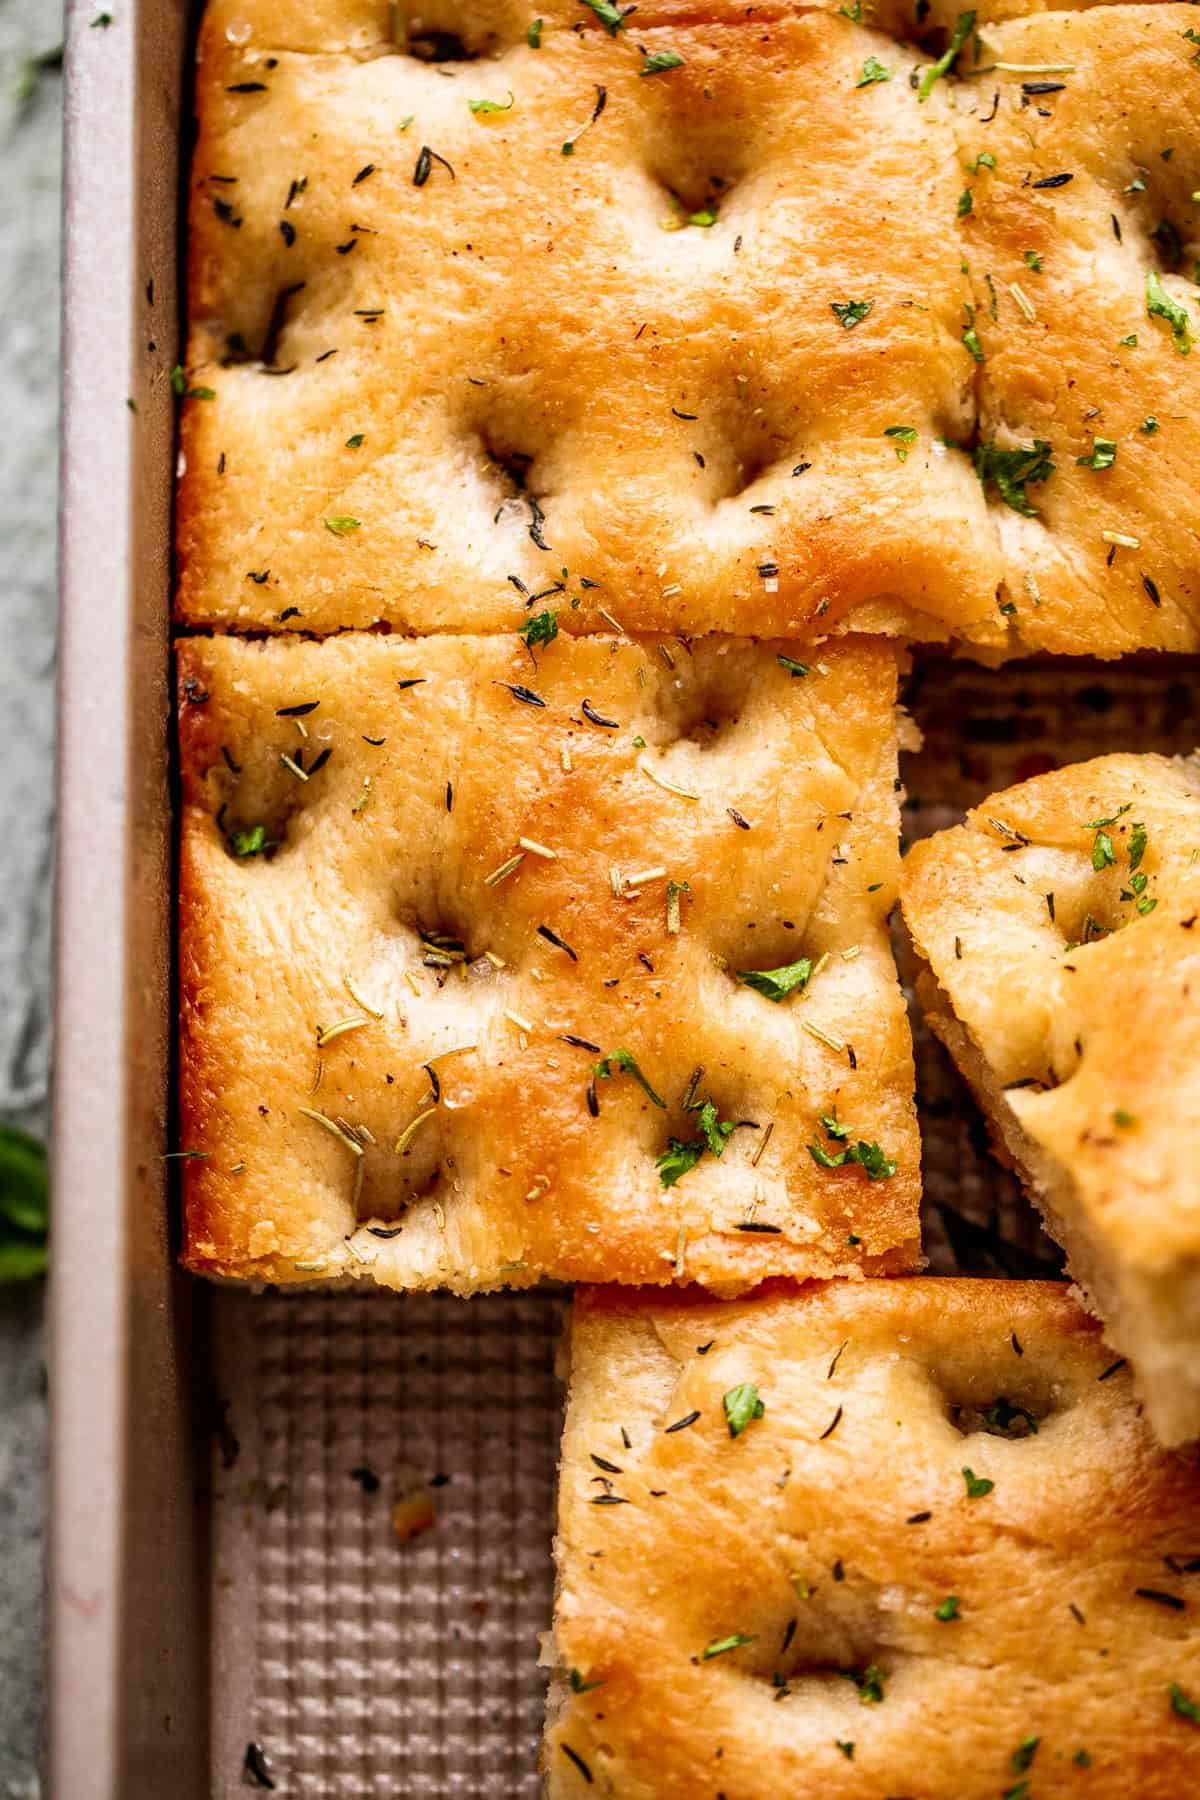 A large pan-sized loaf of focaccia, with one corner cut away.